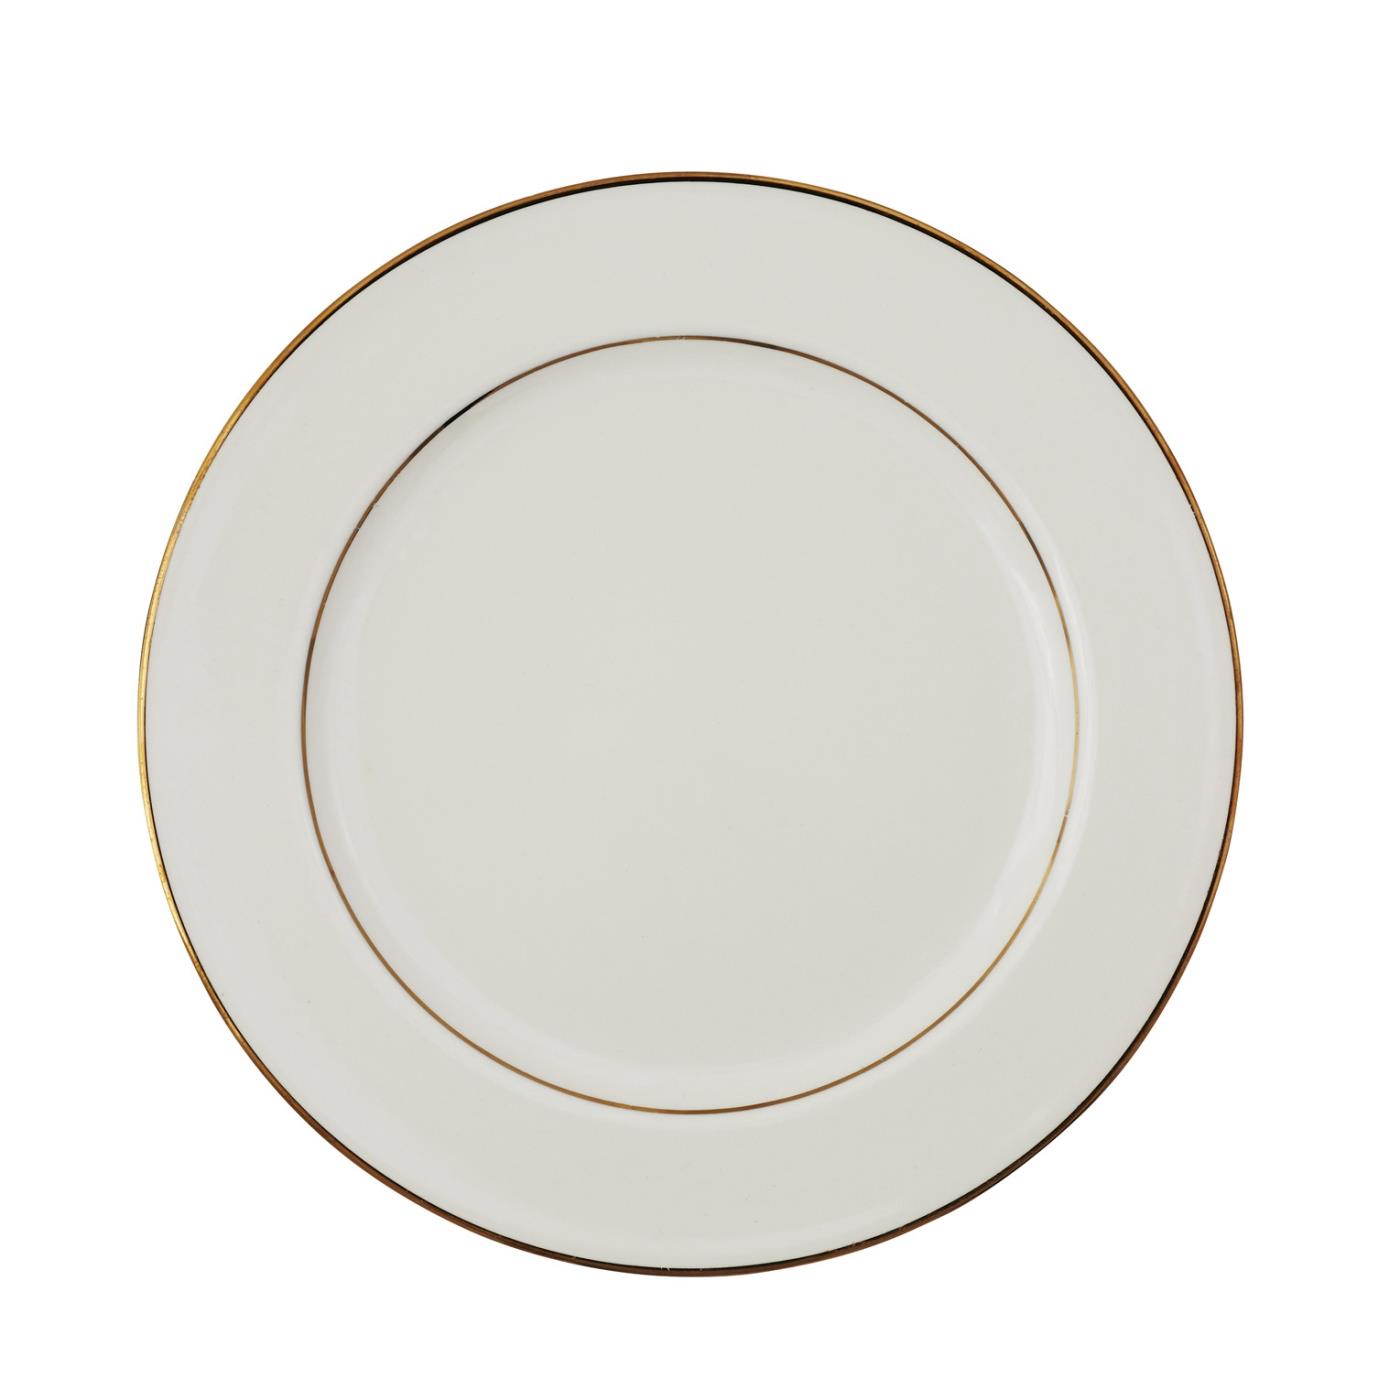 Ecru with Gold Rim Collection -  Dessert Plate 7"